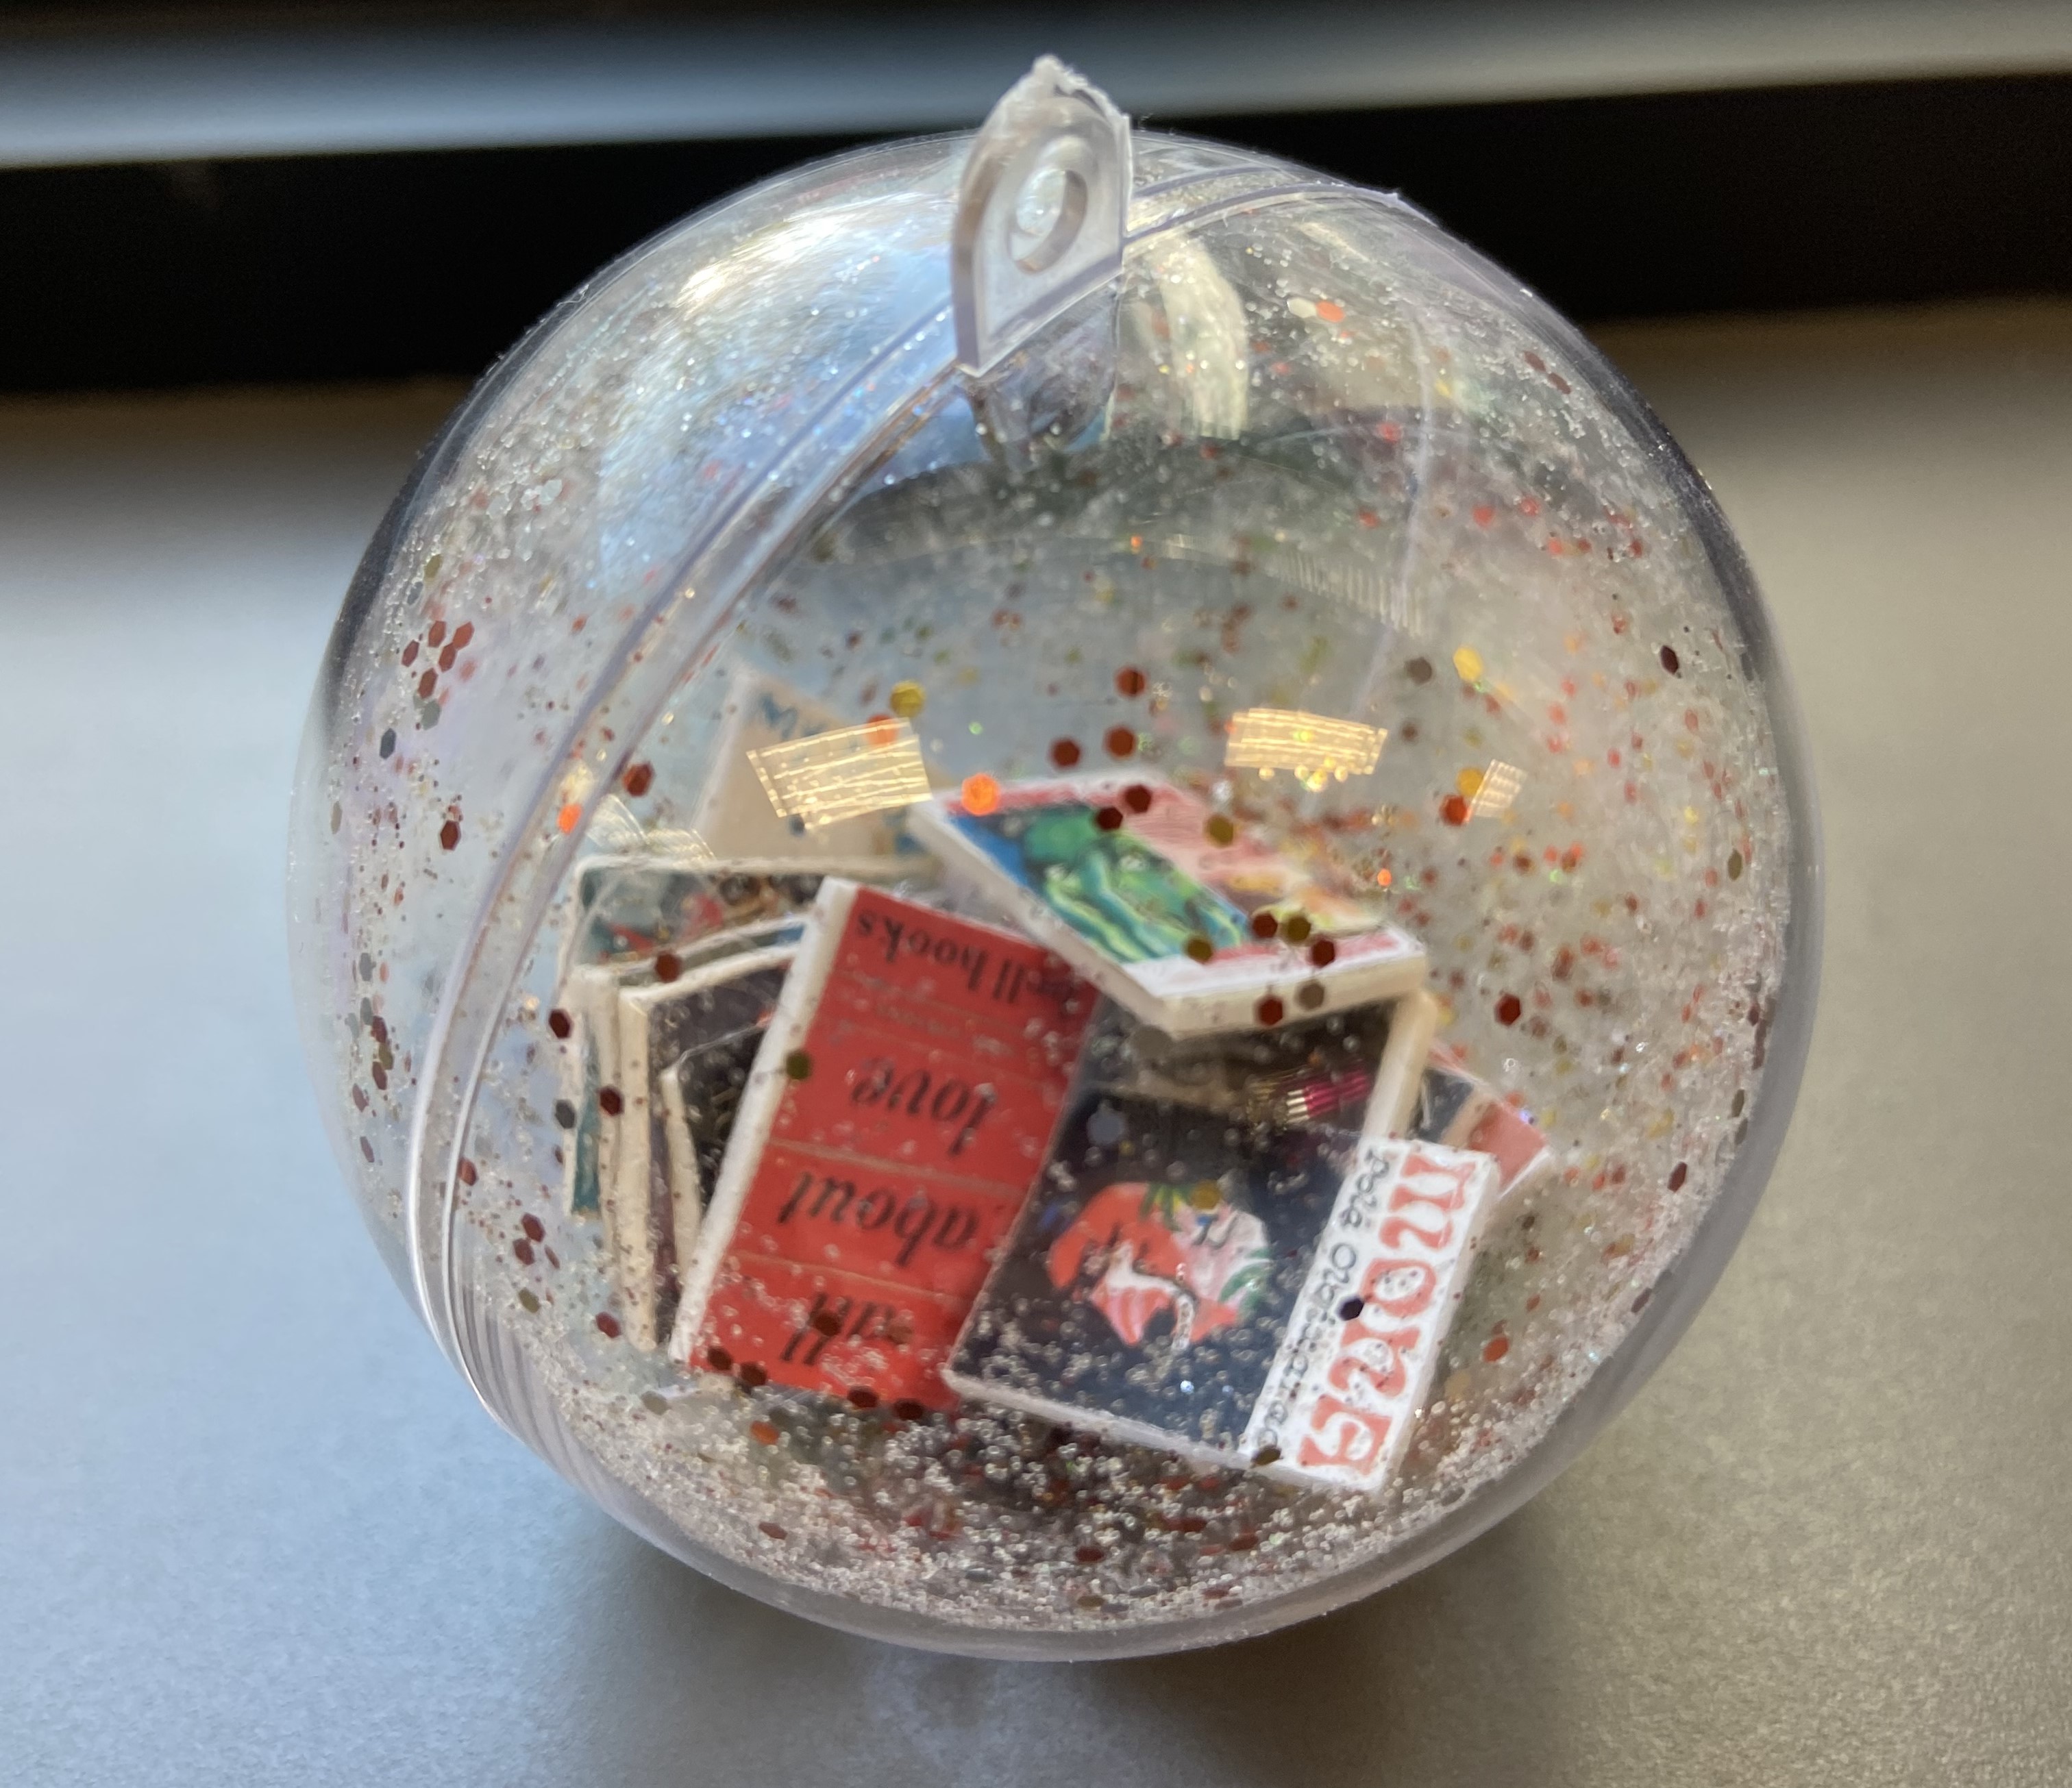 An ornament with miniature books inside.